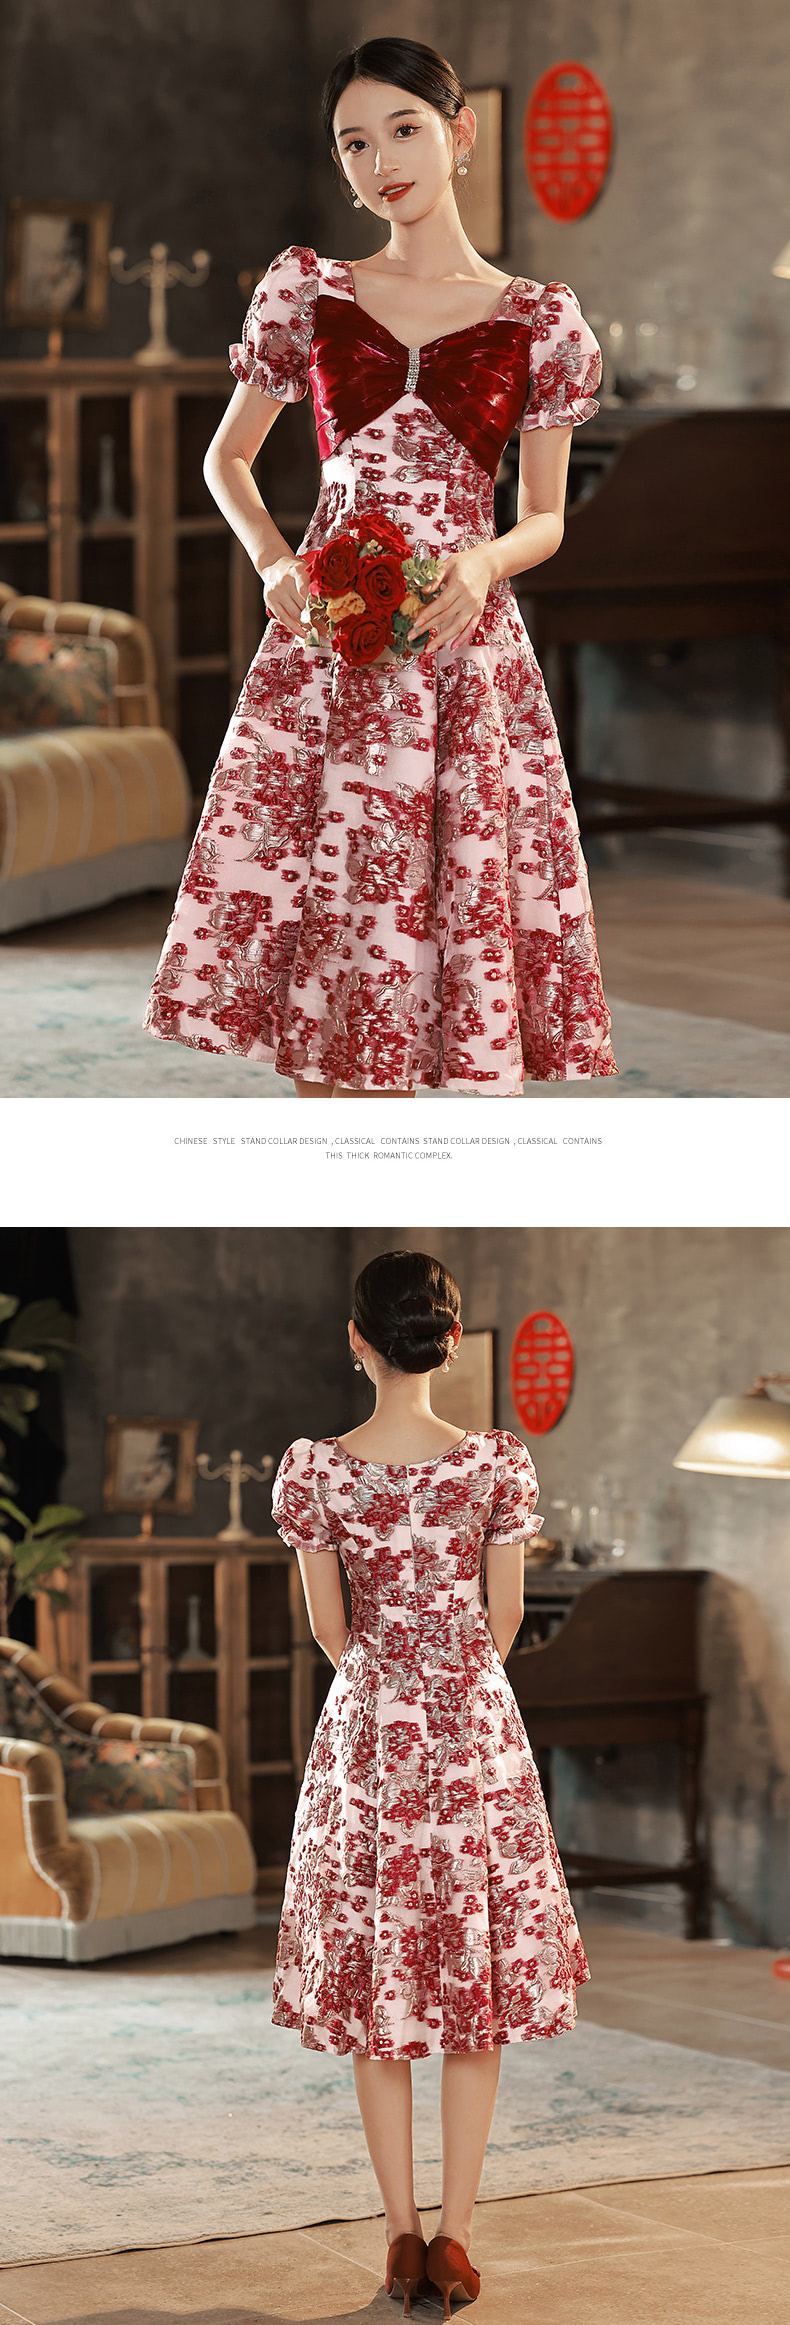 Burgundy-Red-Prom-Midi-Dress-Floral-Evening-Party-Ball-Gown15.jpg